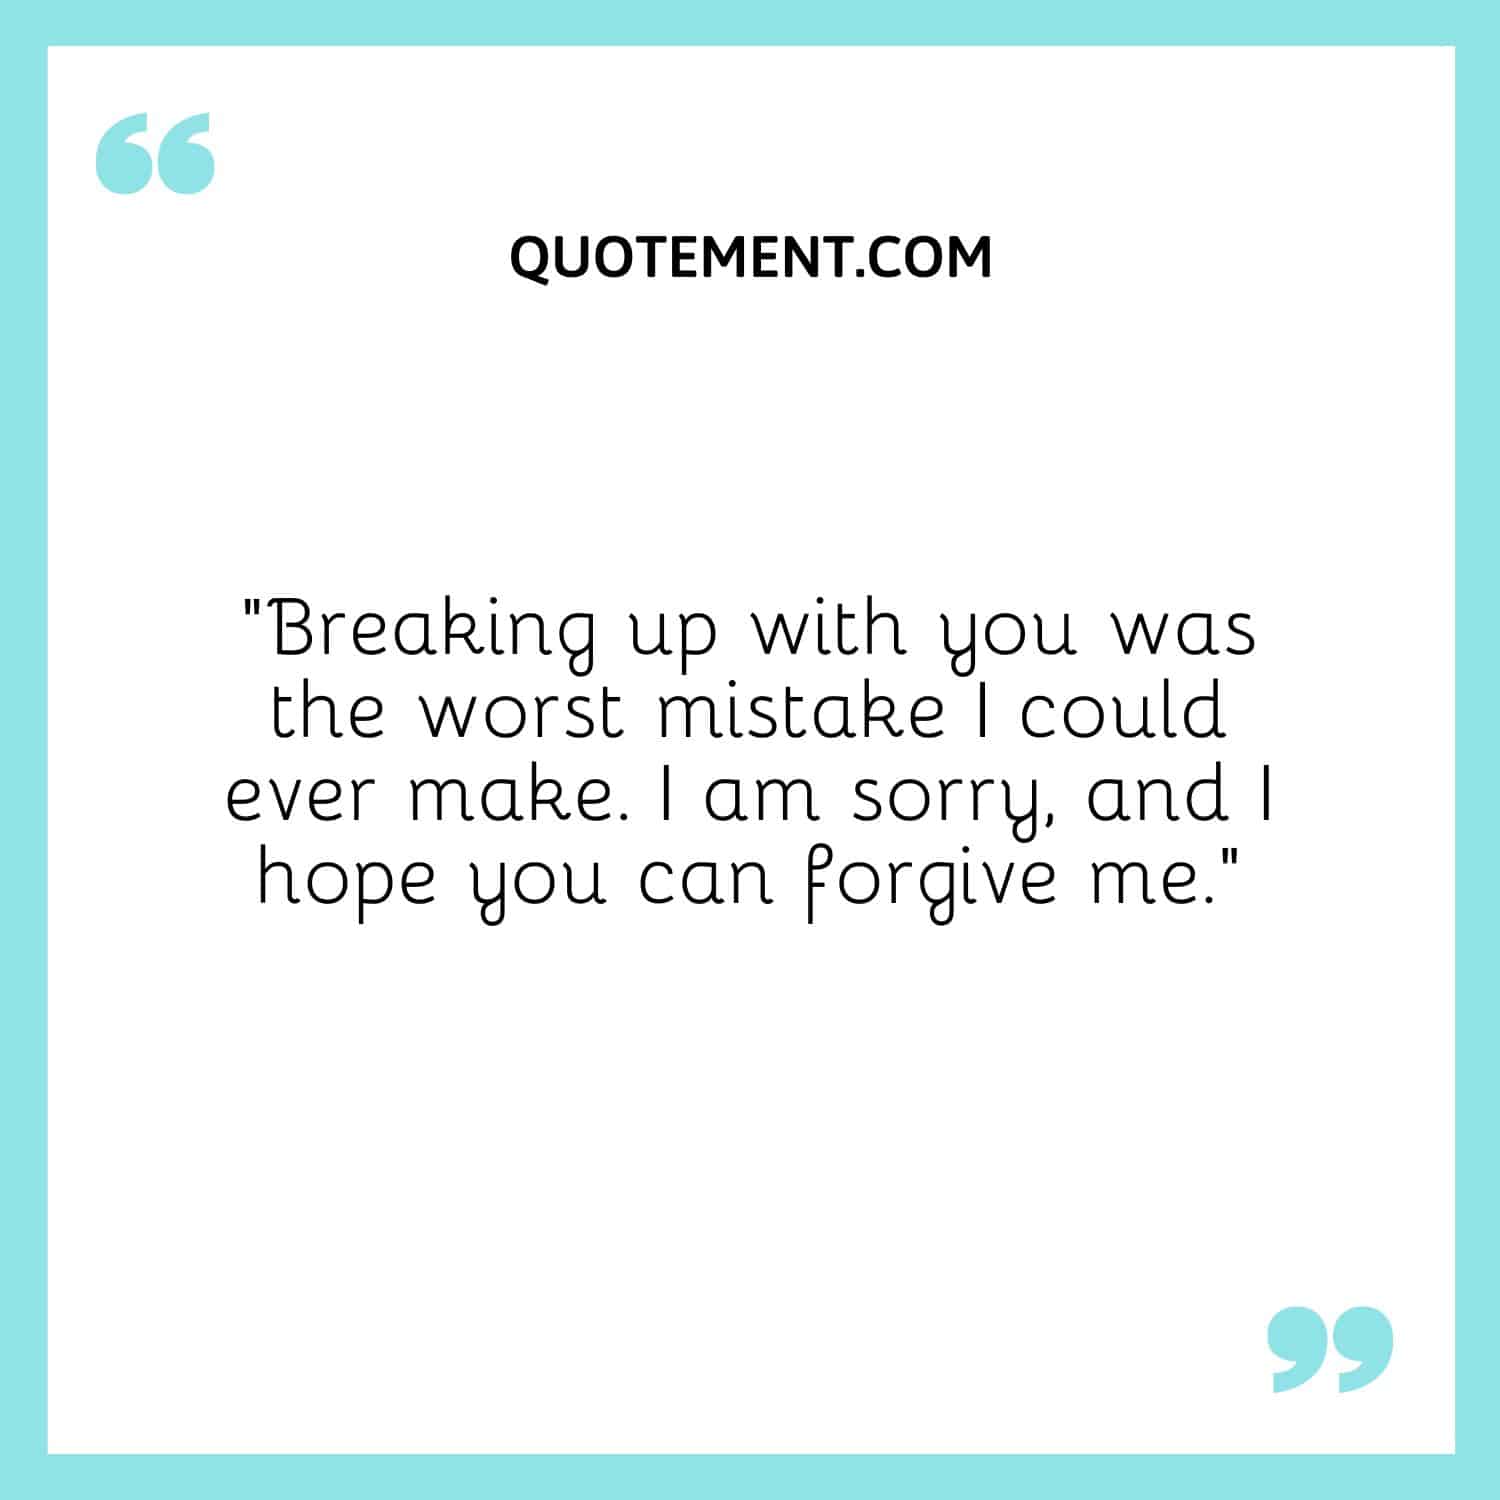 Breaking up with you was the worst mistake I could ever make